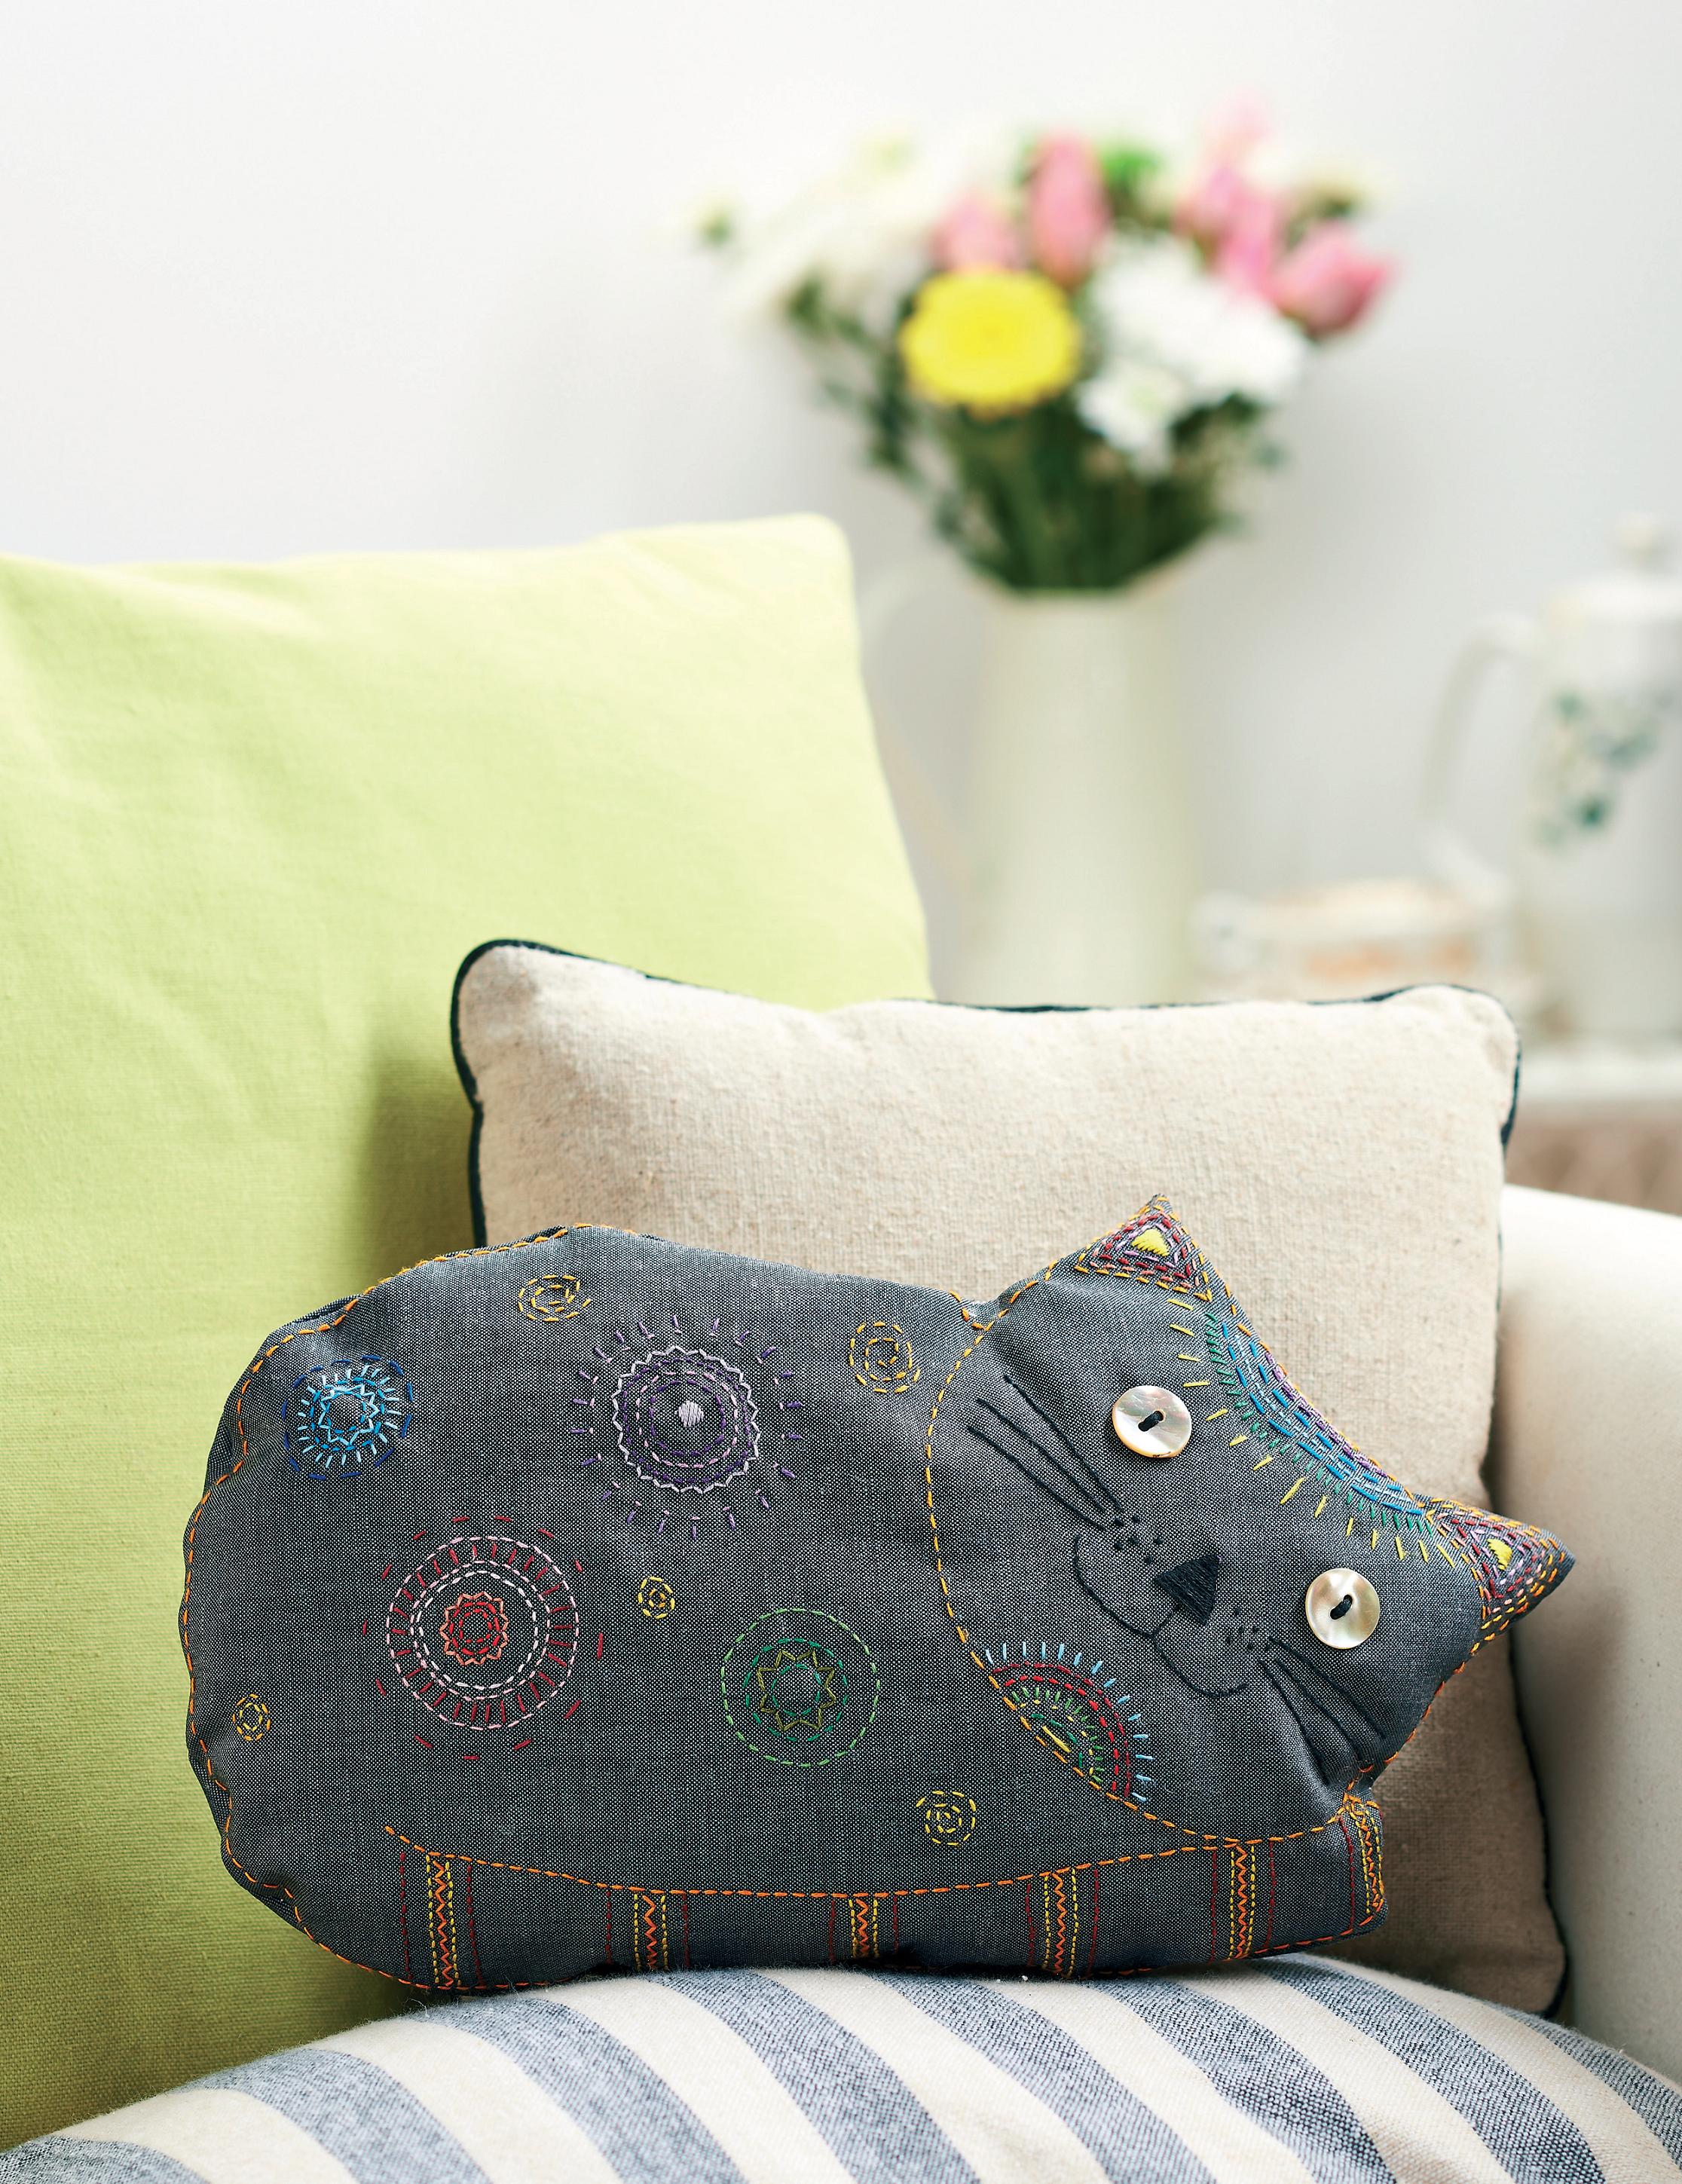 Embroidered Cat Cushion - Free sewing patterns - Sew Magazine